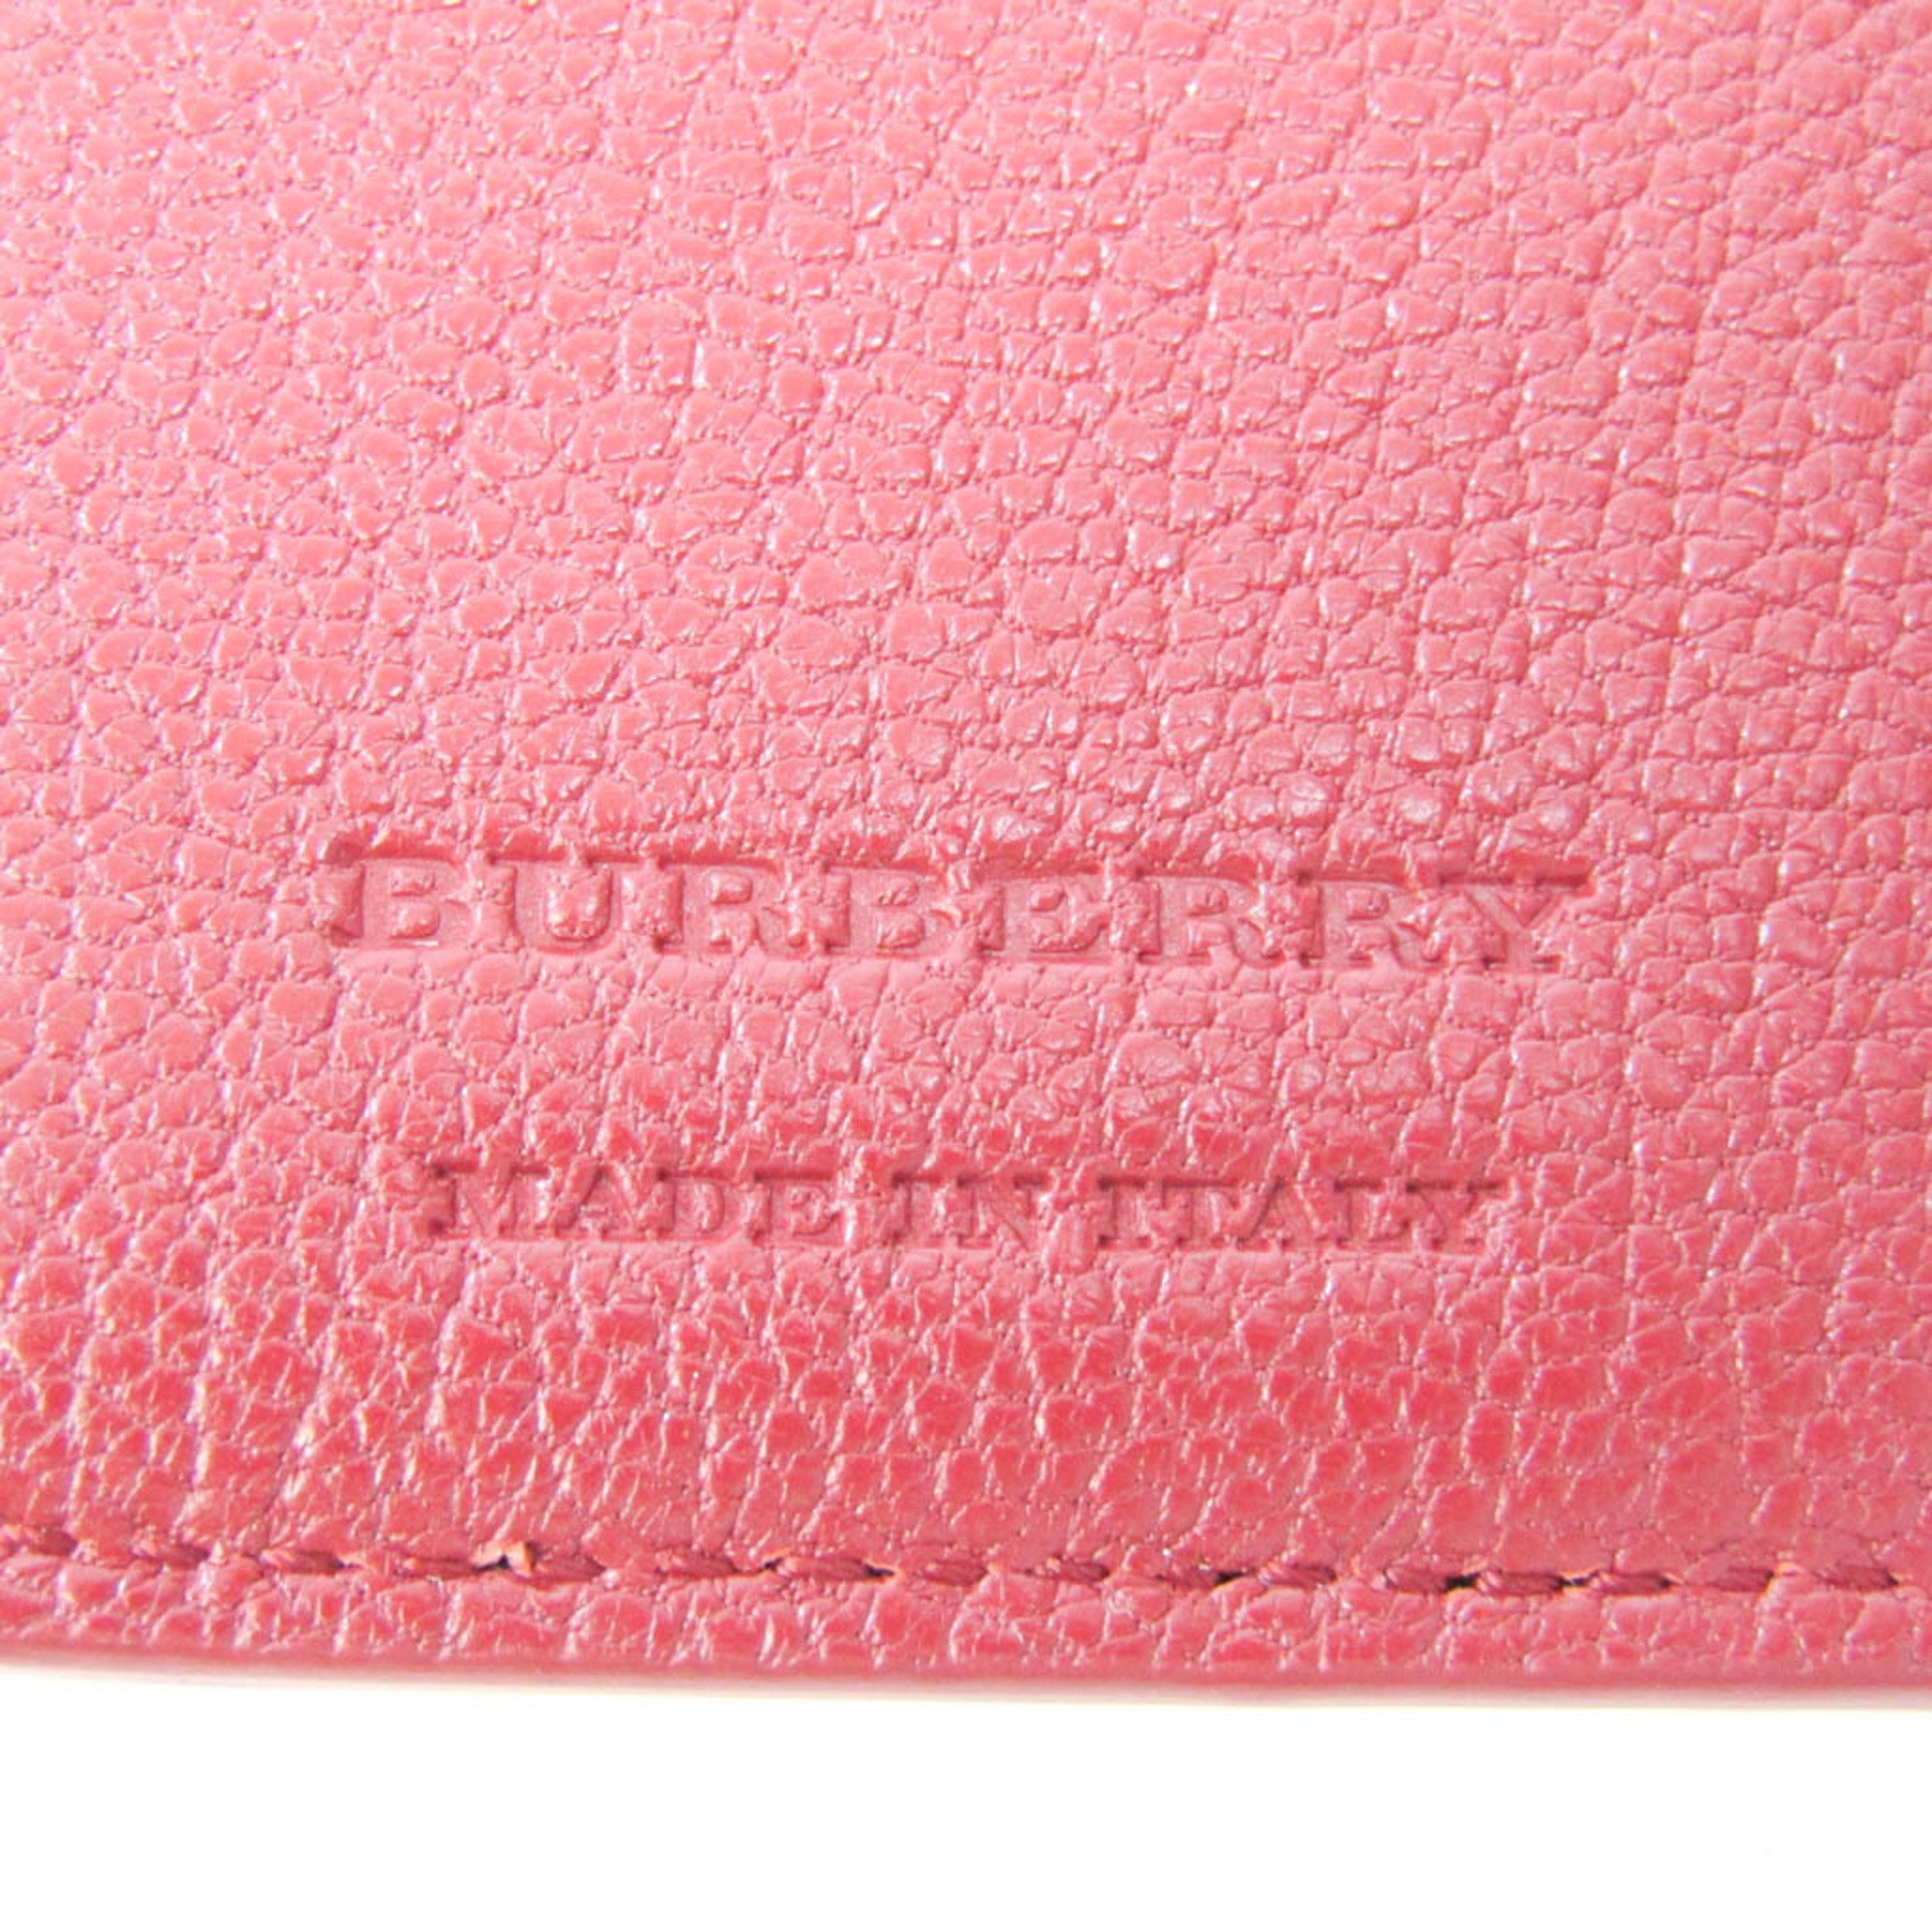 Burberry 8005356 Women,Men Leather Bill Wallet (tri-fold) Red Color